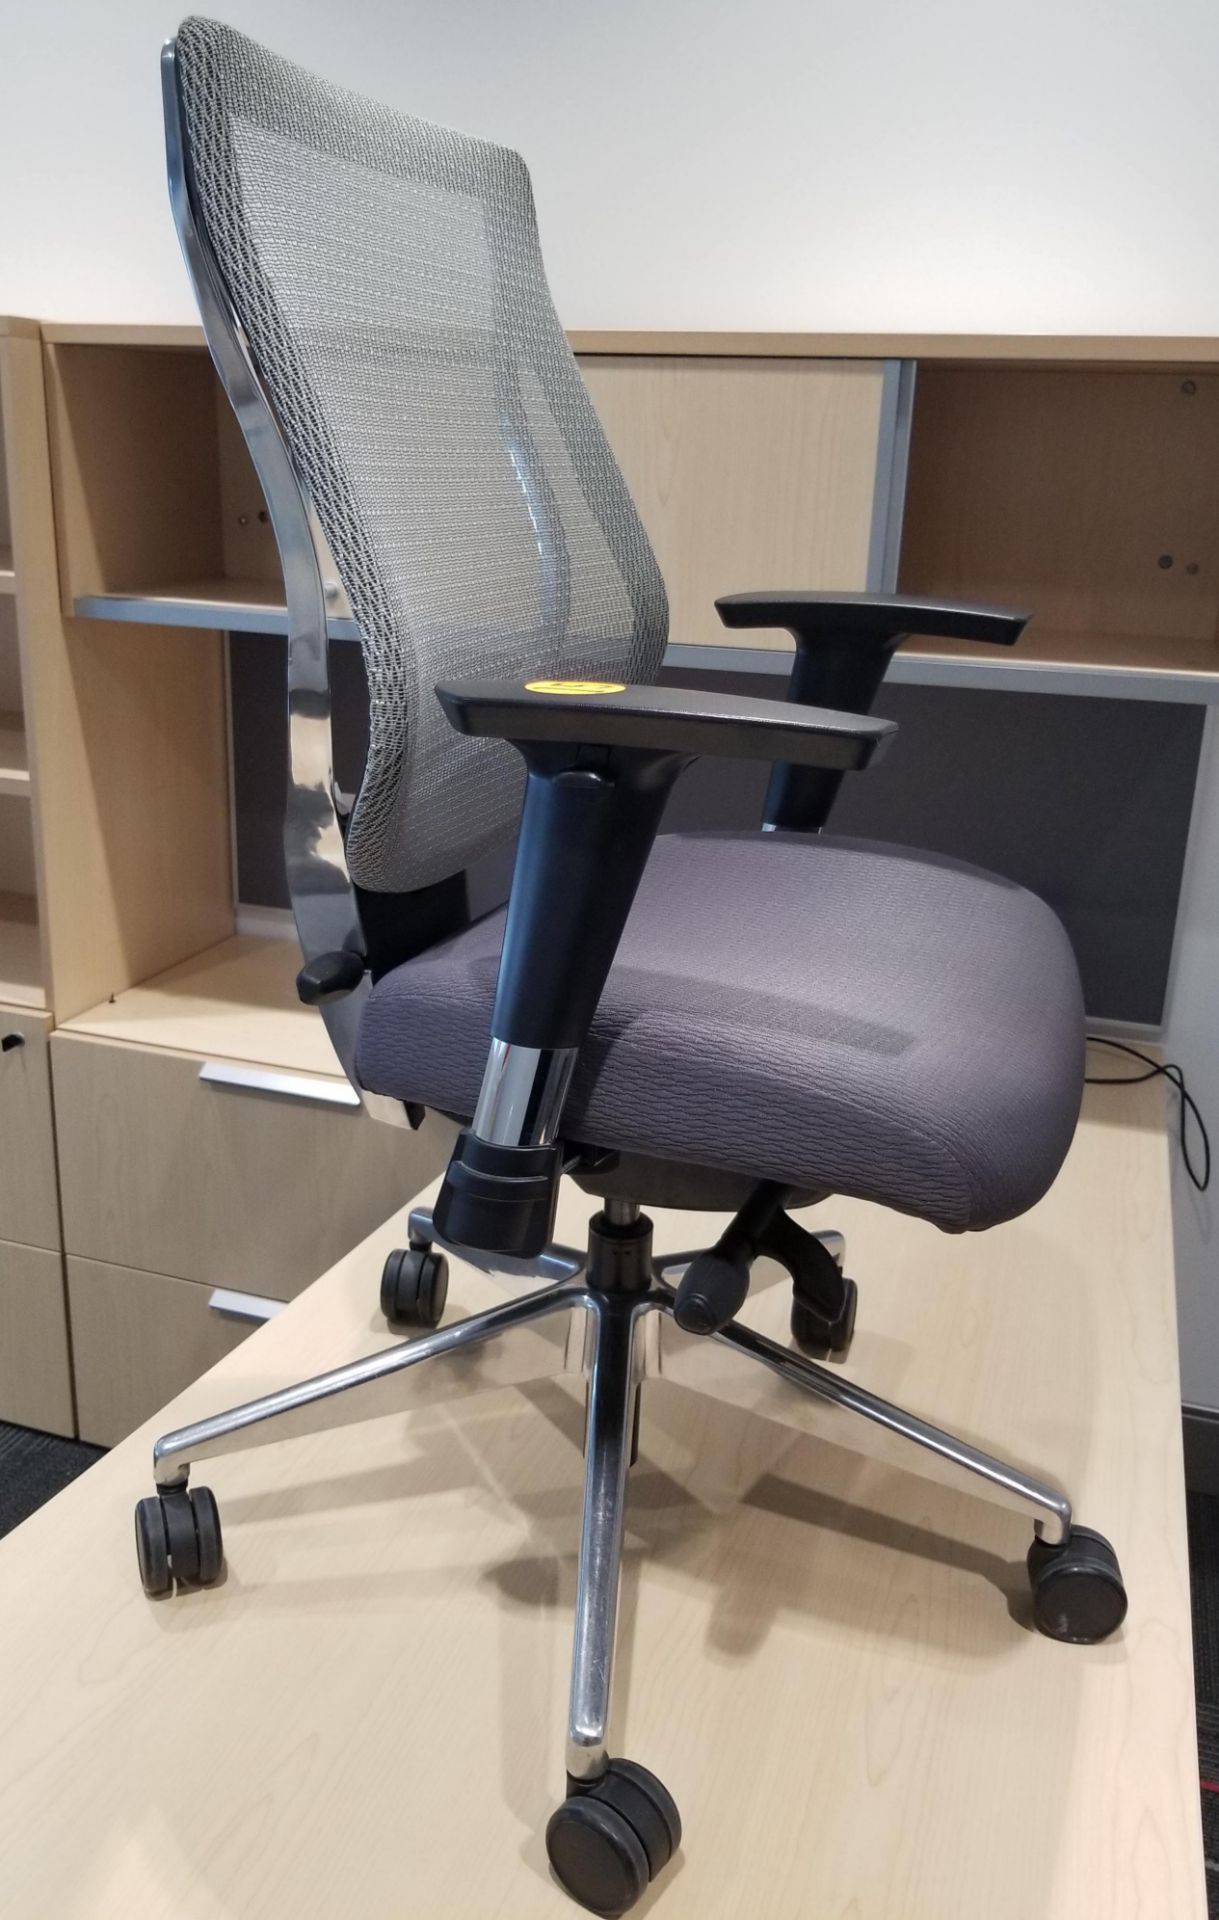 ALLSEATING - EXEC. CHAIR ON CASTERS, GREY W/ MESH BACK, ADJUSTABLE HEIGHT, ADJUSTABLE ARMS - Image 6 of 8